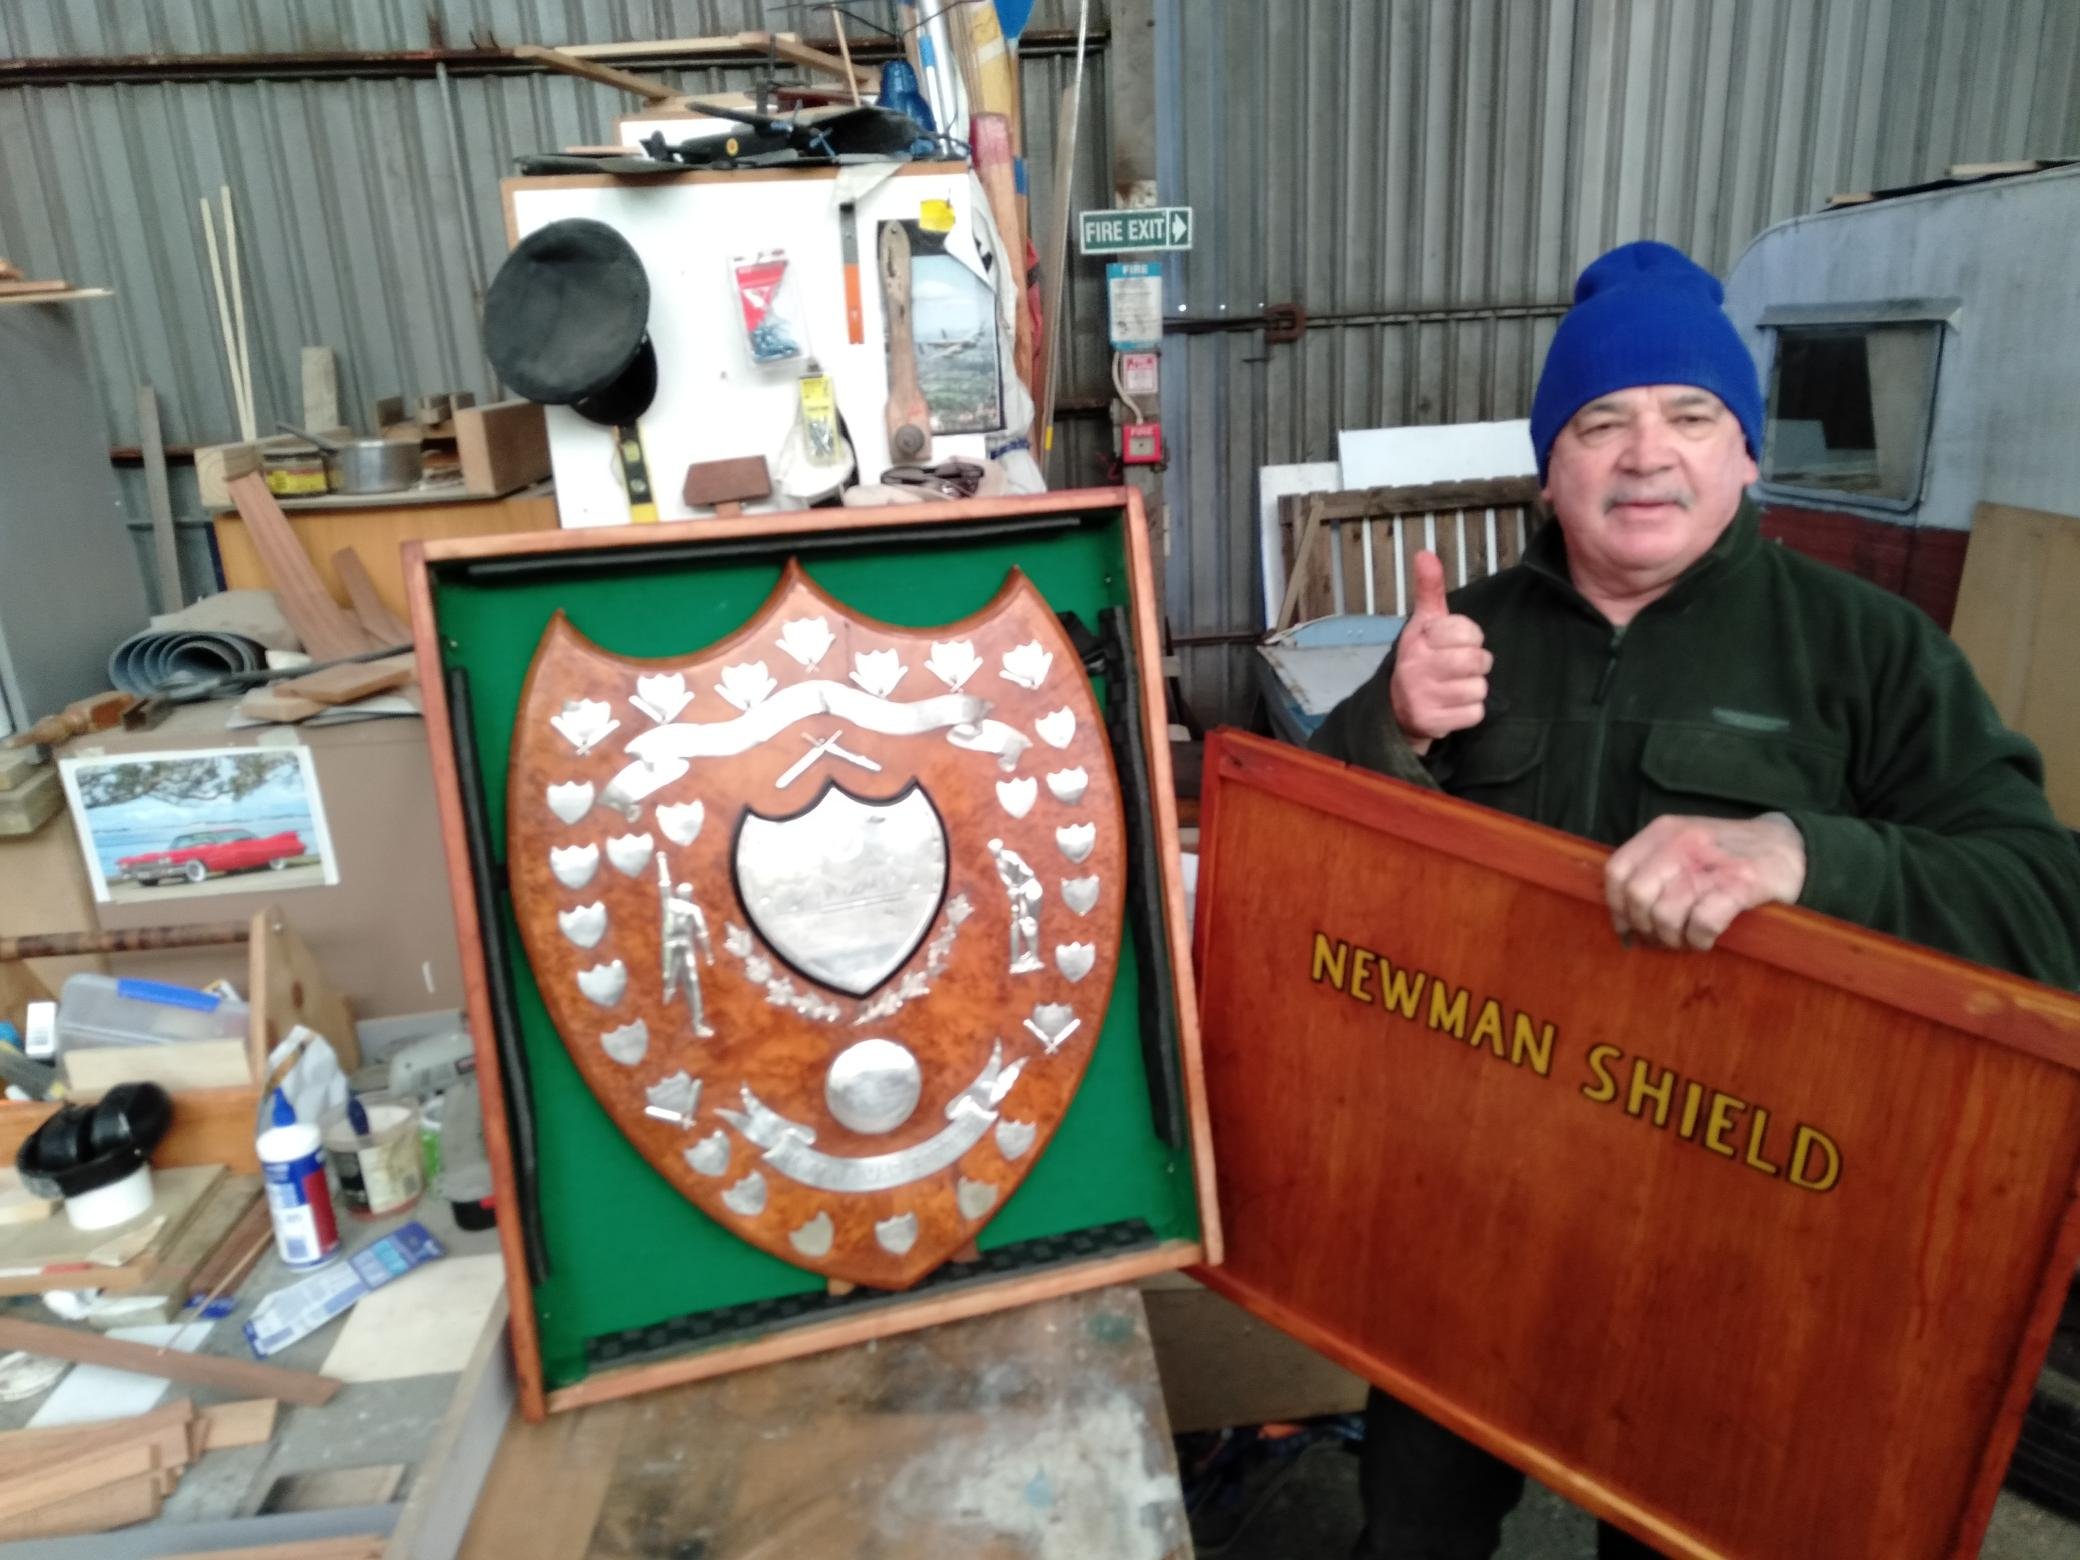  Newman Shield gets face lift by Denis. 